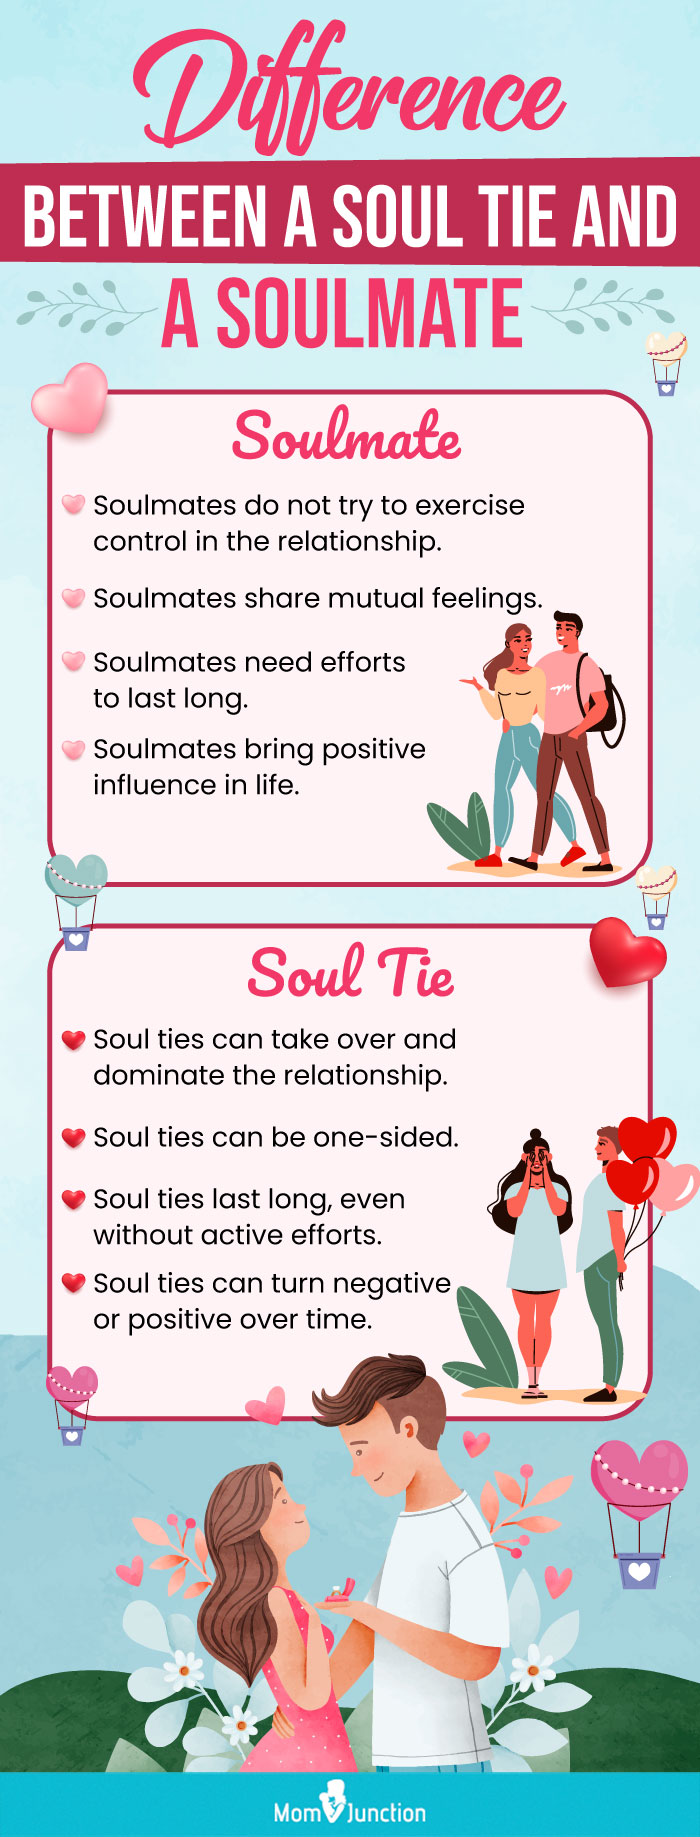 6 Telling Signs Your Soul Is Trapped 